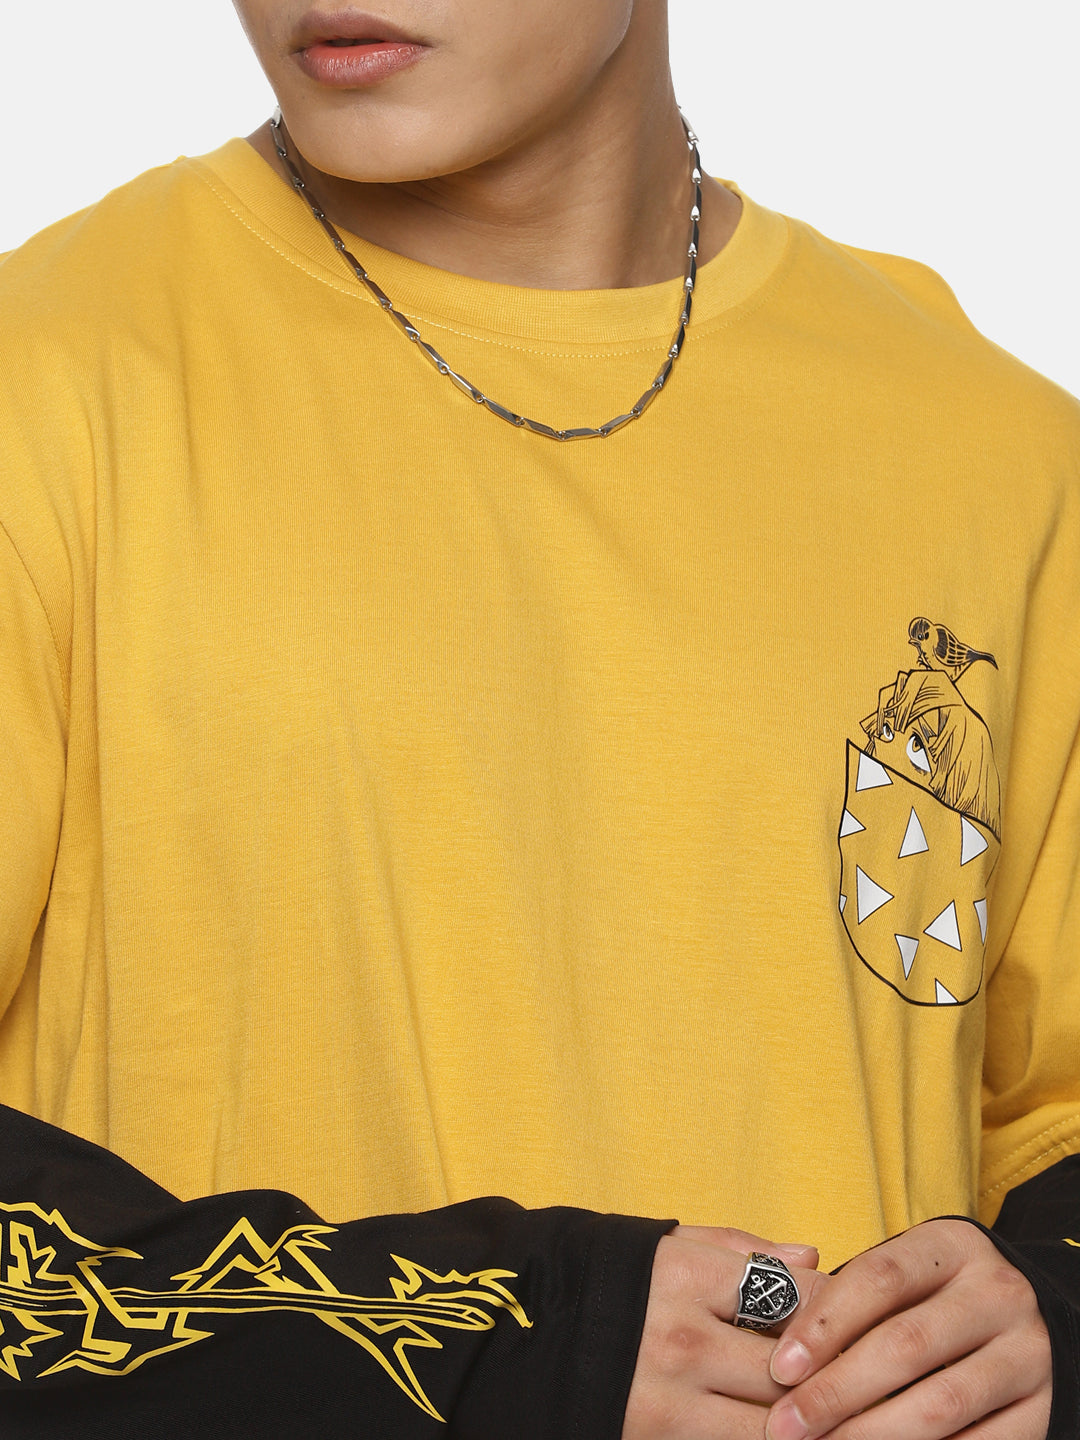 Zenitsu Full Sleeve Oversized T-Shirt in Mustard with Black DR Sleeve Pattern, featuring Zenitsu's face and sword designs - perfect for anime fans looking for unique streetwear style